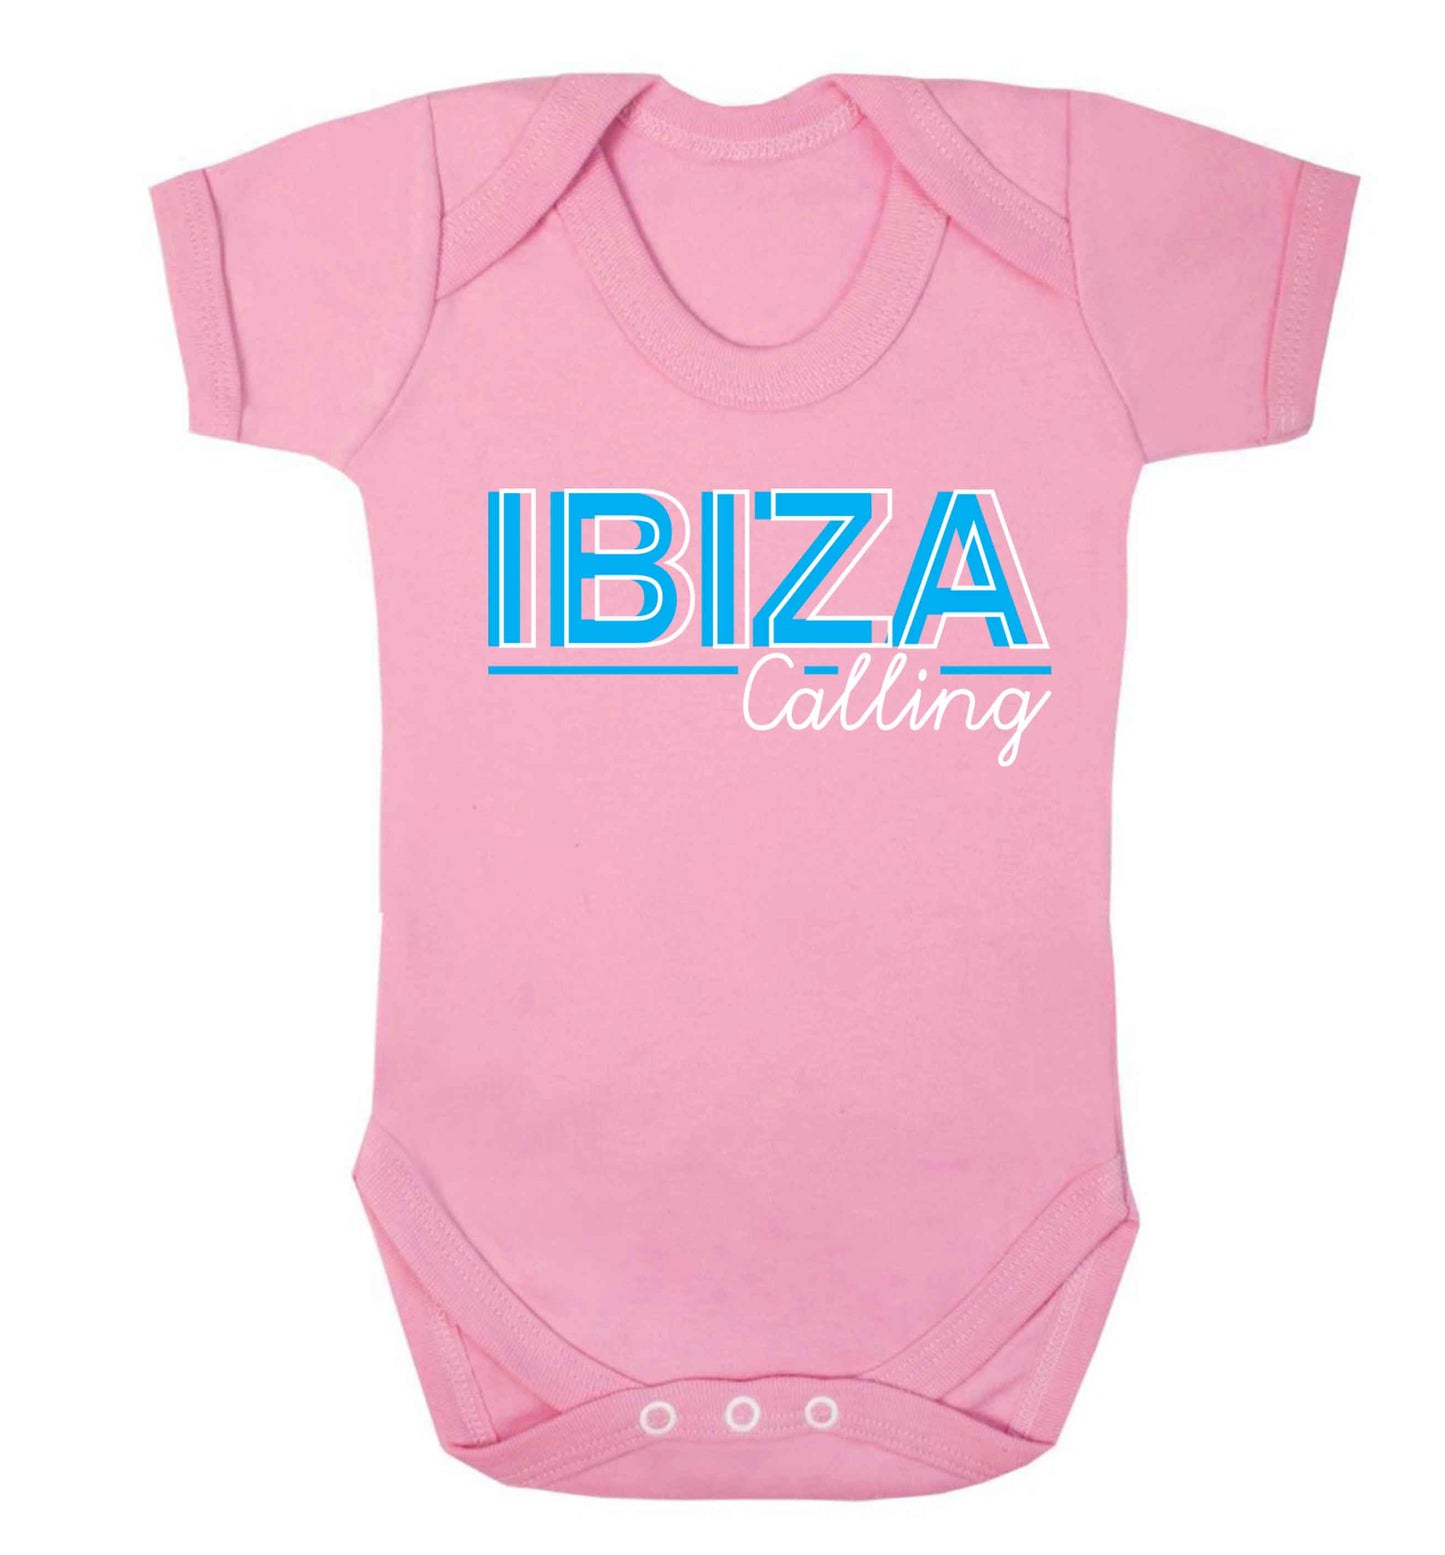 Ibiza calling Baby Vest pale pink 18-24 months